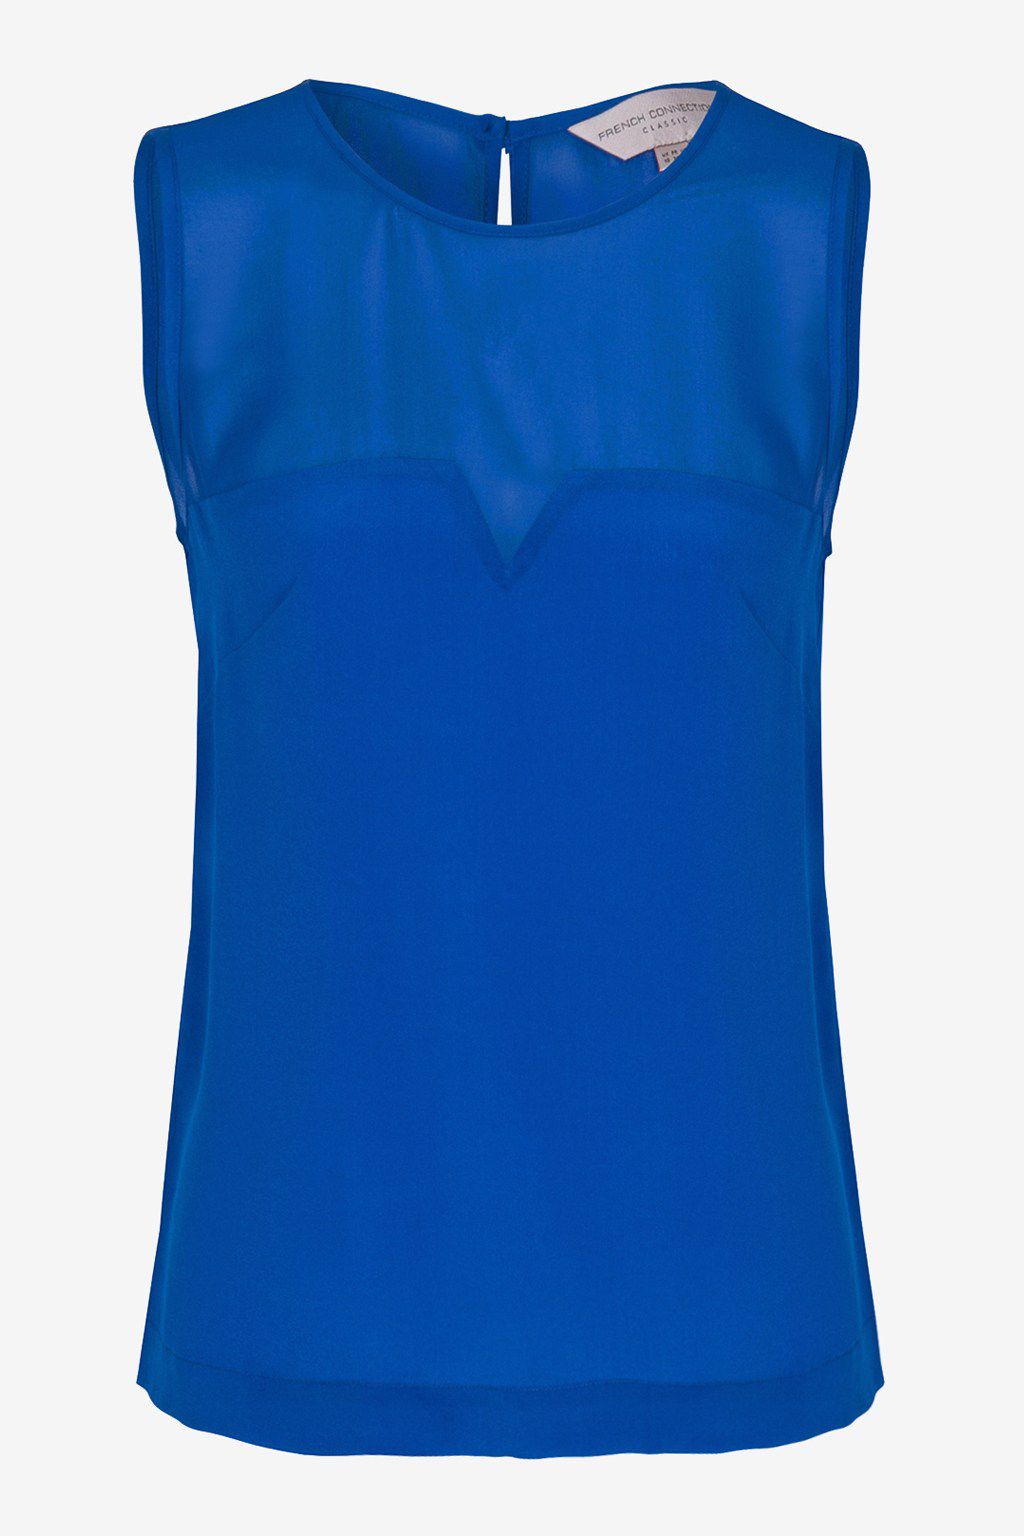 French connection Prism Silk Block Sleeveless Top in Blue | Lyst